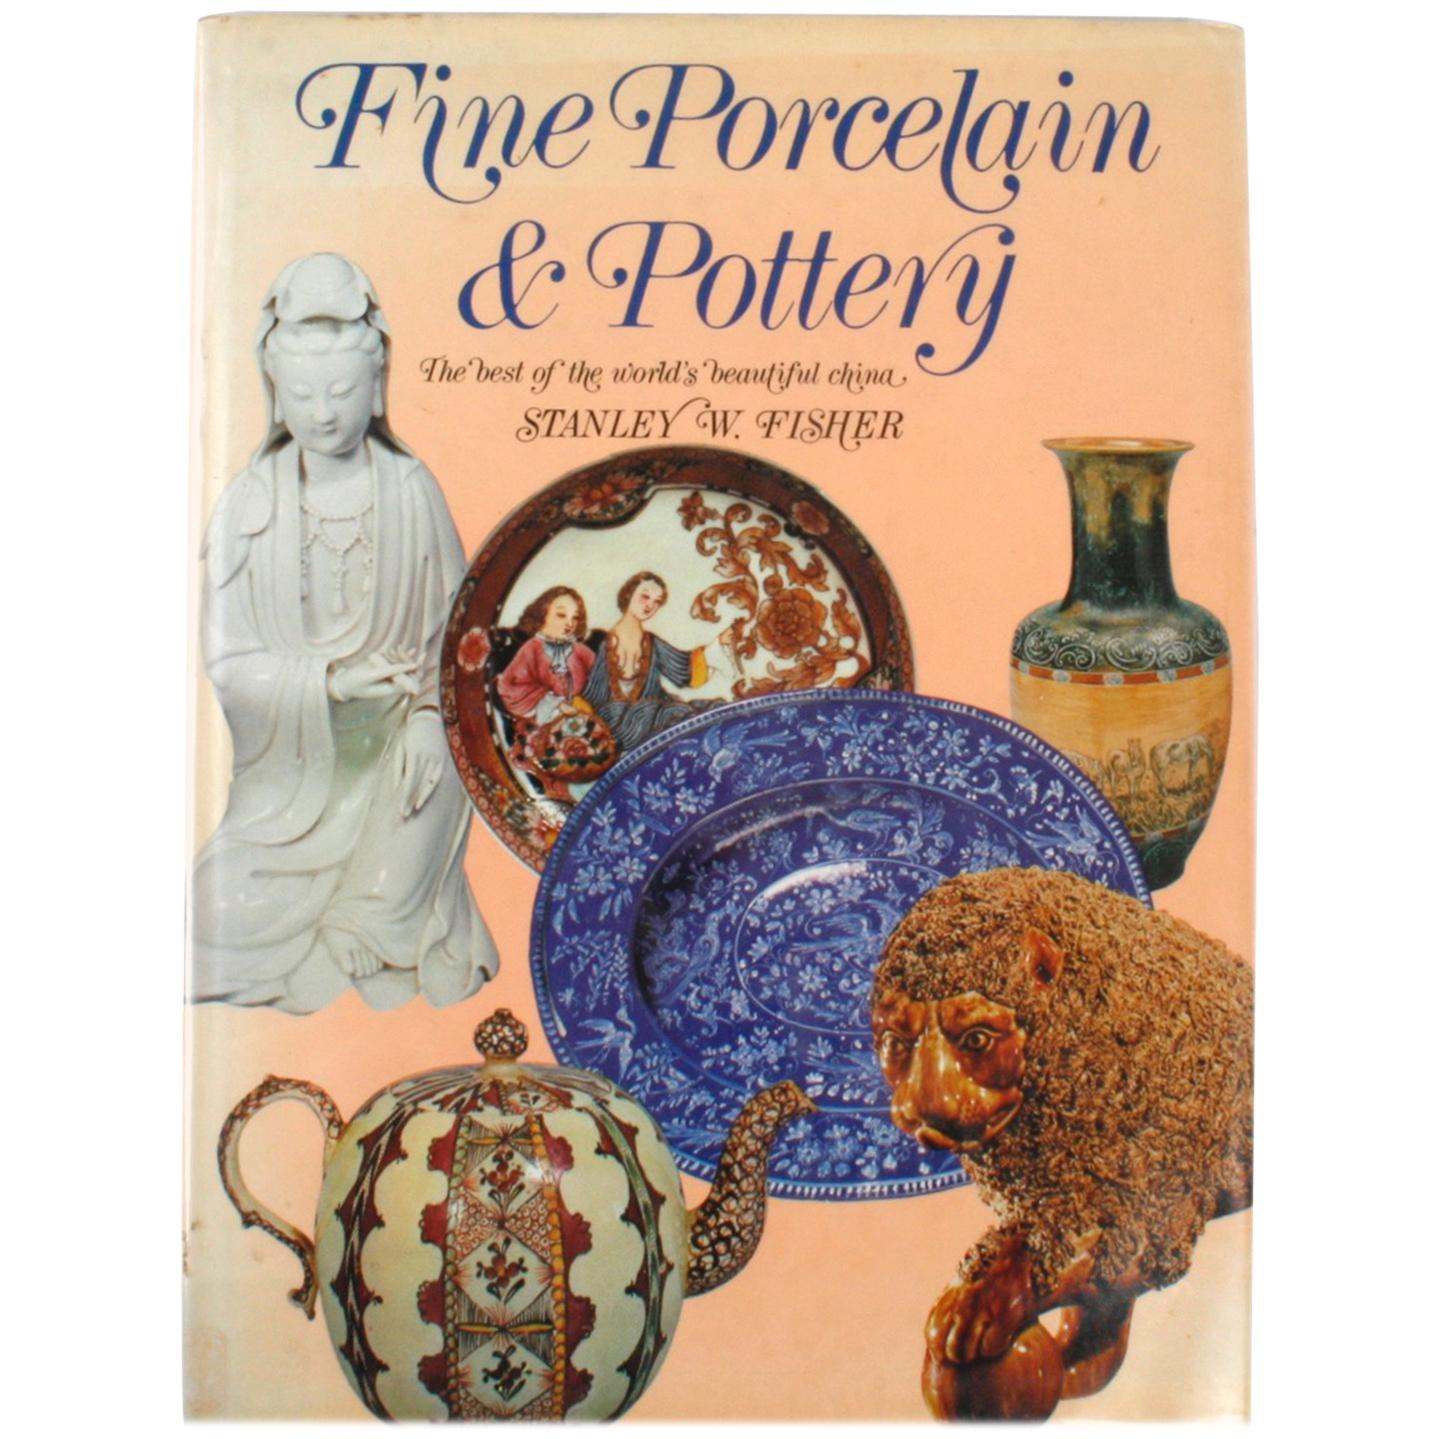 Fine Porcelain & Pottery by Stanley W. Fisher